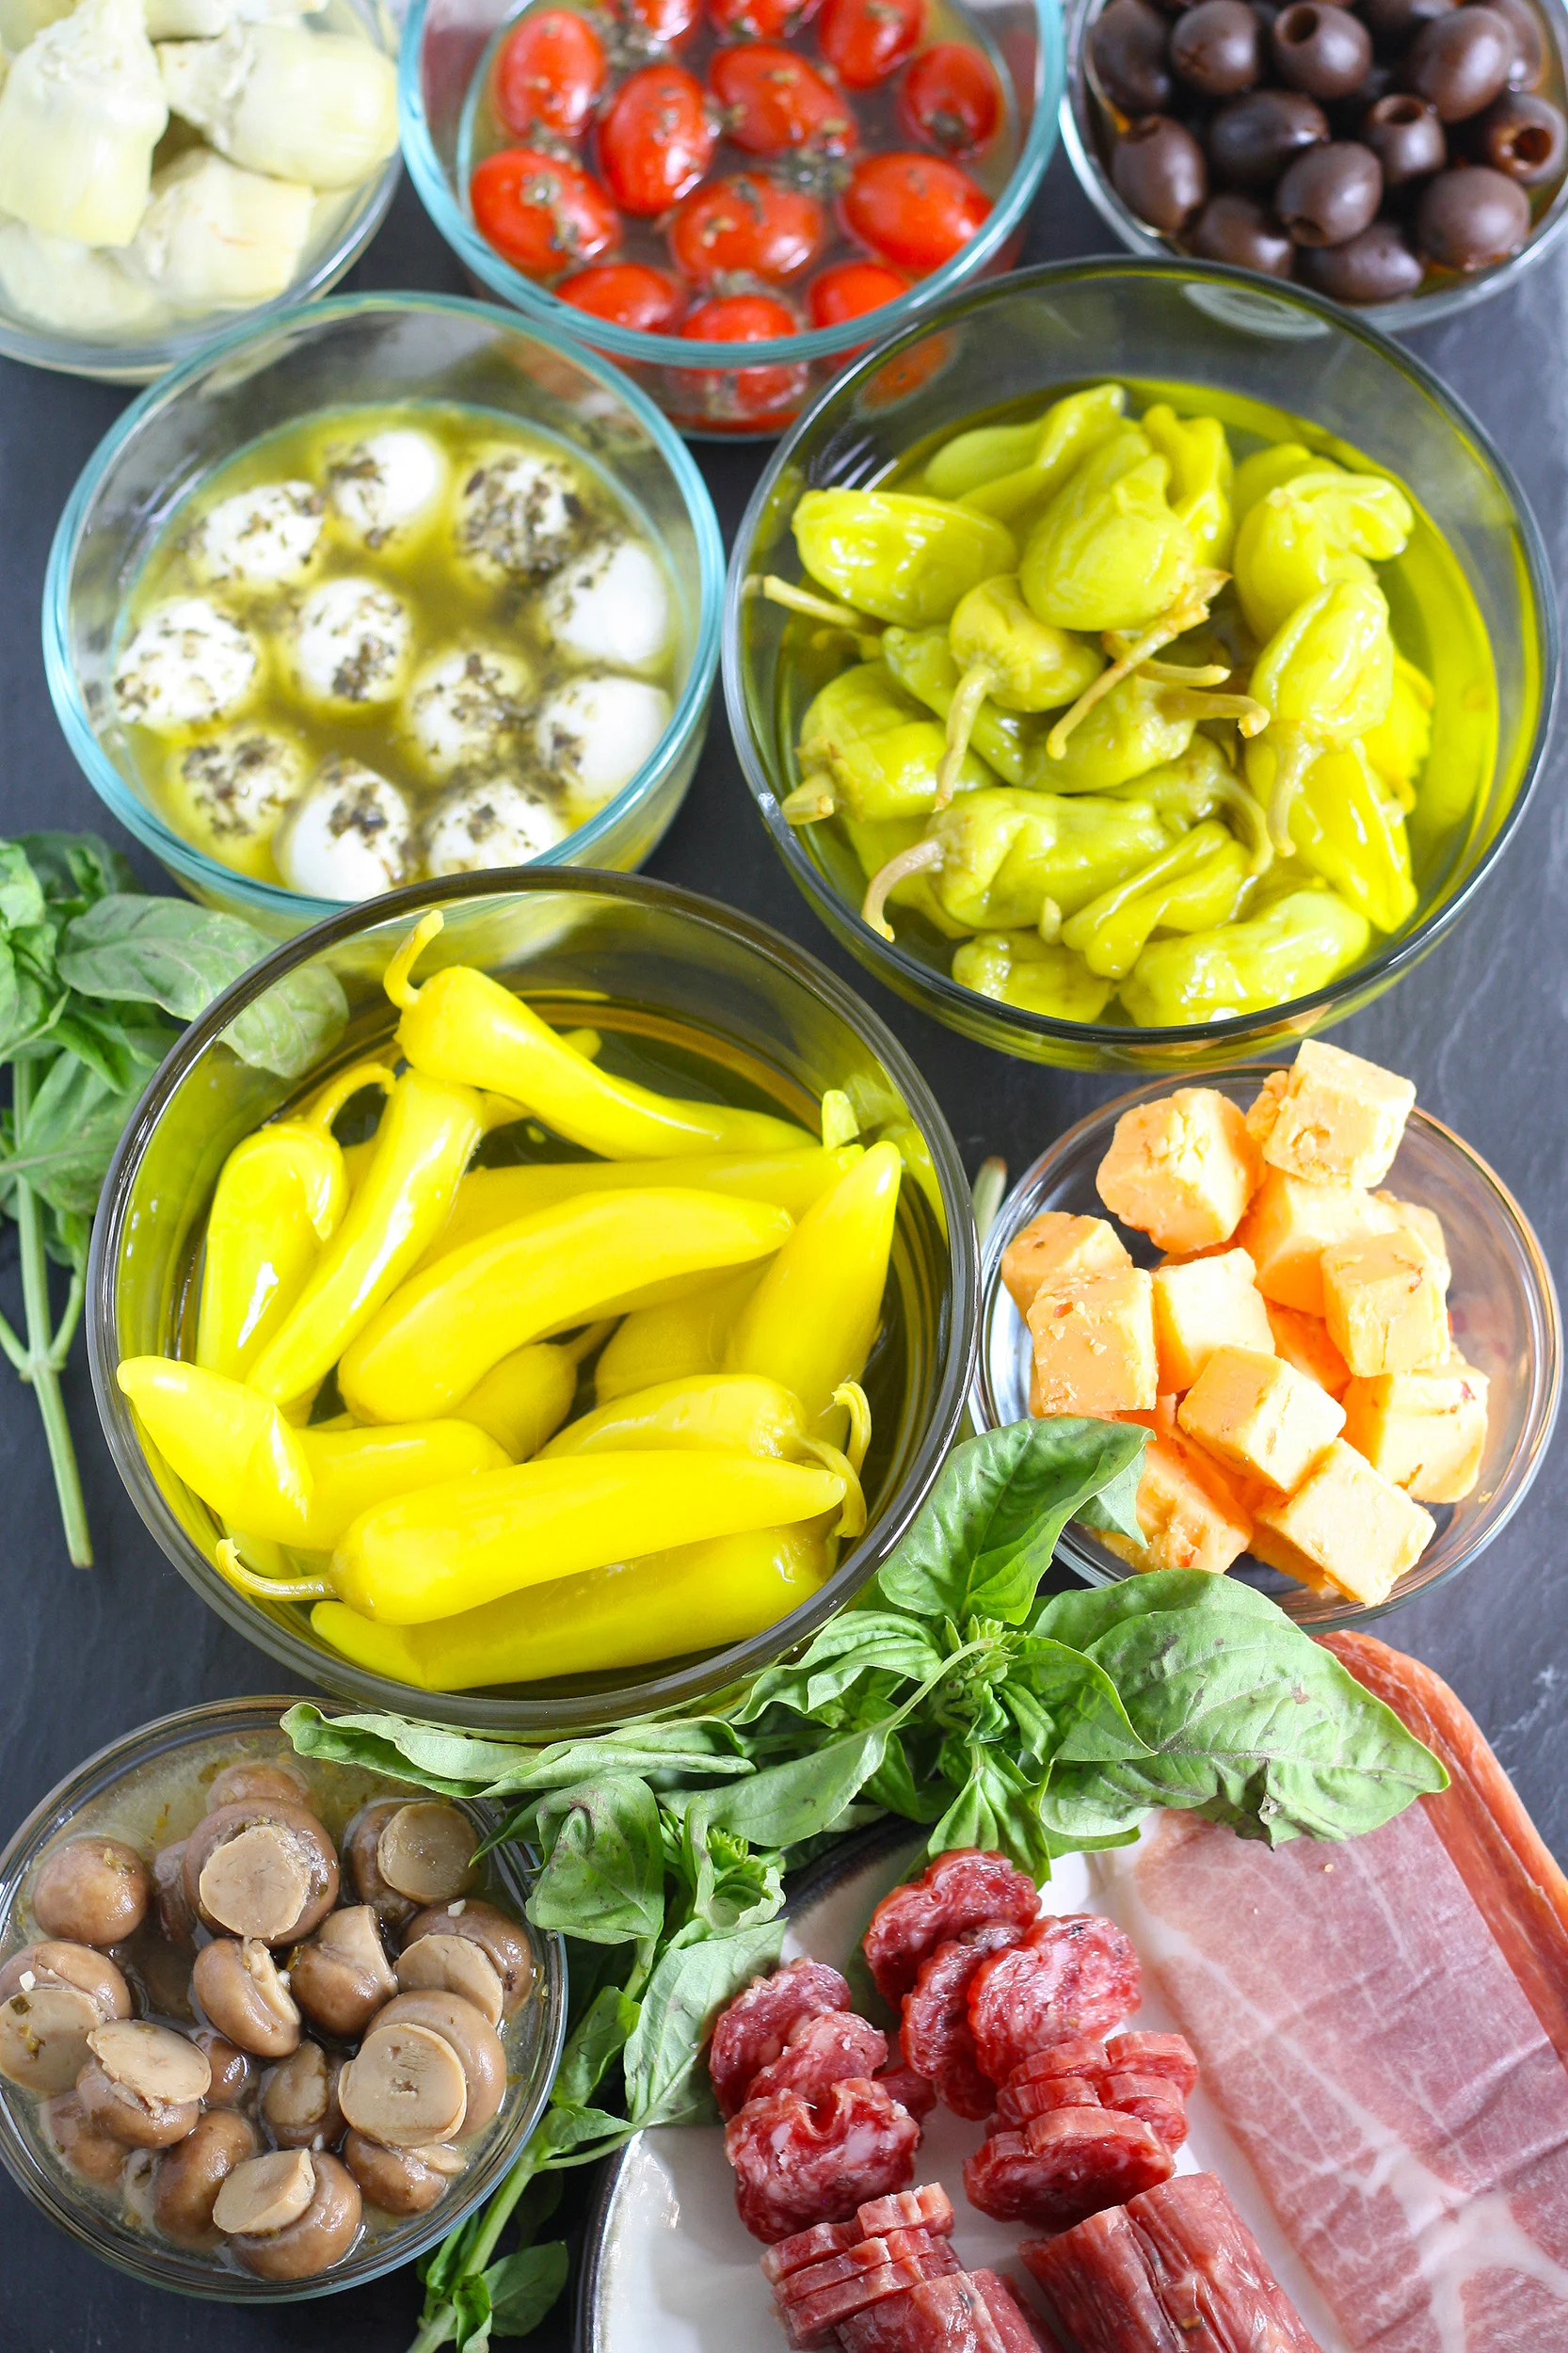 antipasto ingredients in glass bowls and on plates